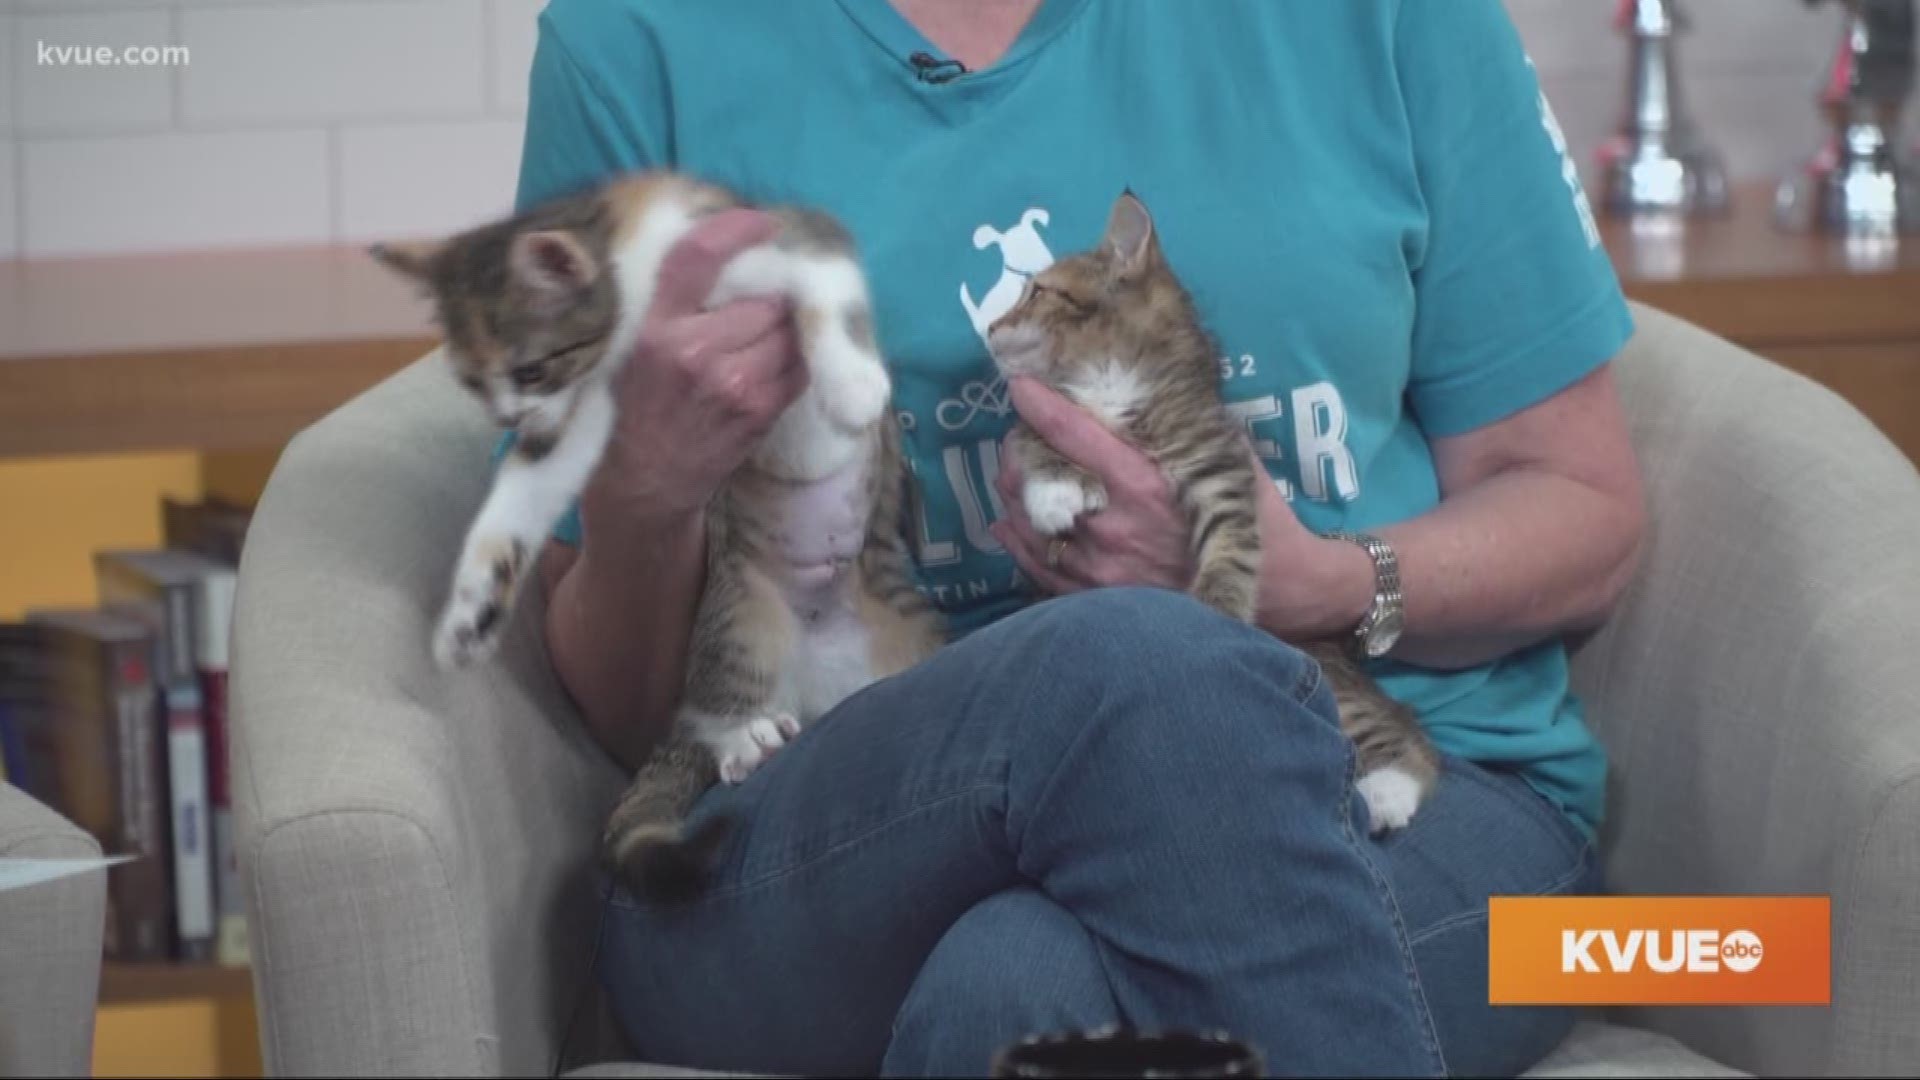 The KVUE Pets of the Week are a group of kittens: Sage, Chive, Basil and Caraway.